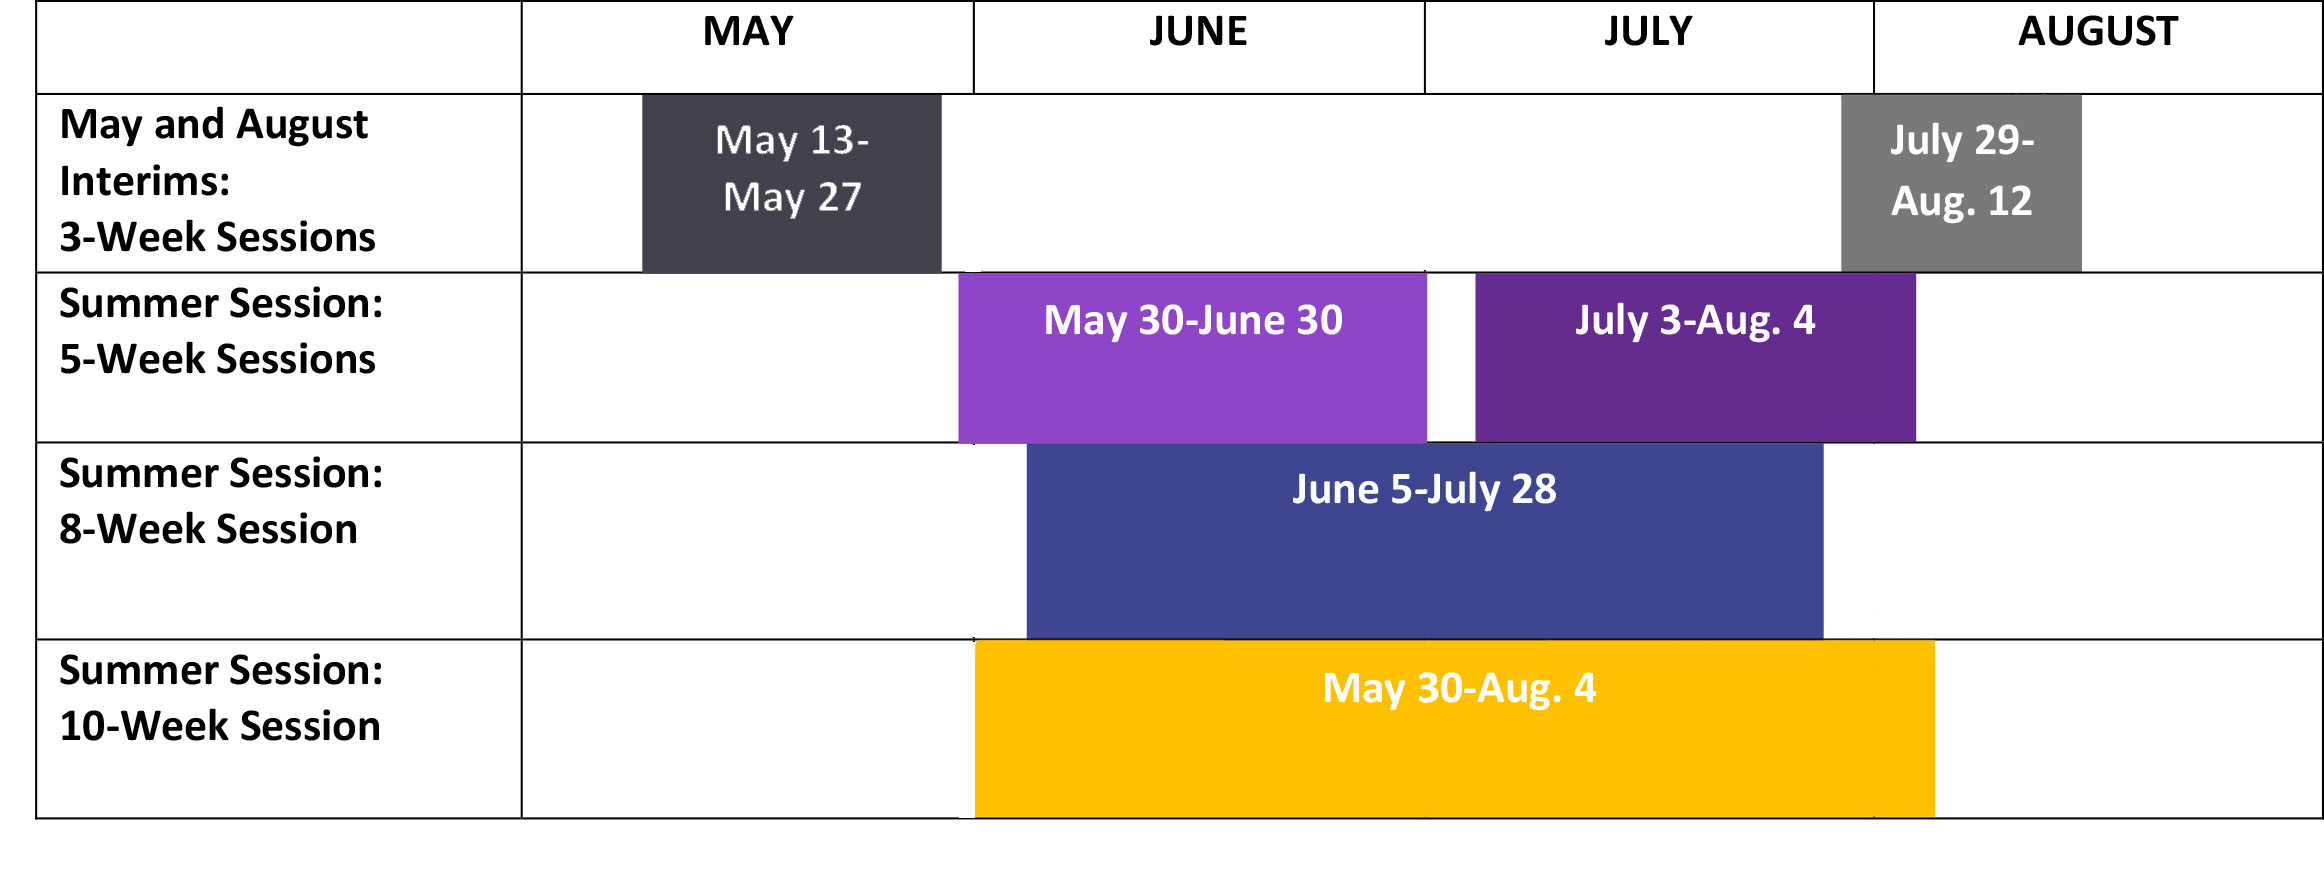 May and August Interims: 3-Week Sessions, May 13-May 27 and July 29-Aug. 12. 5-Week Summer Sessions: May 30-June 30 and July 3-Aug. 4. 8-Week Summer Session: June 5-July 28. 10-Week Summer Session: May 30-Aug. 4.